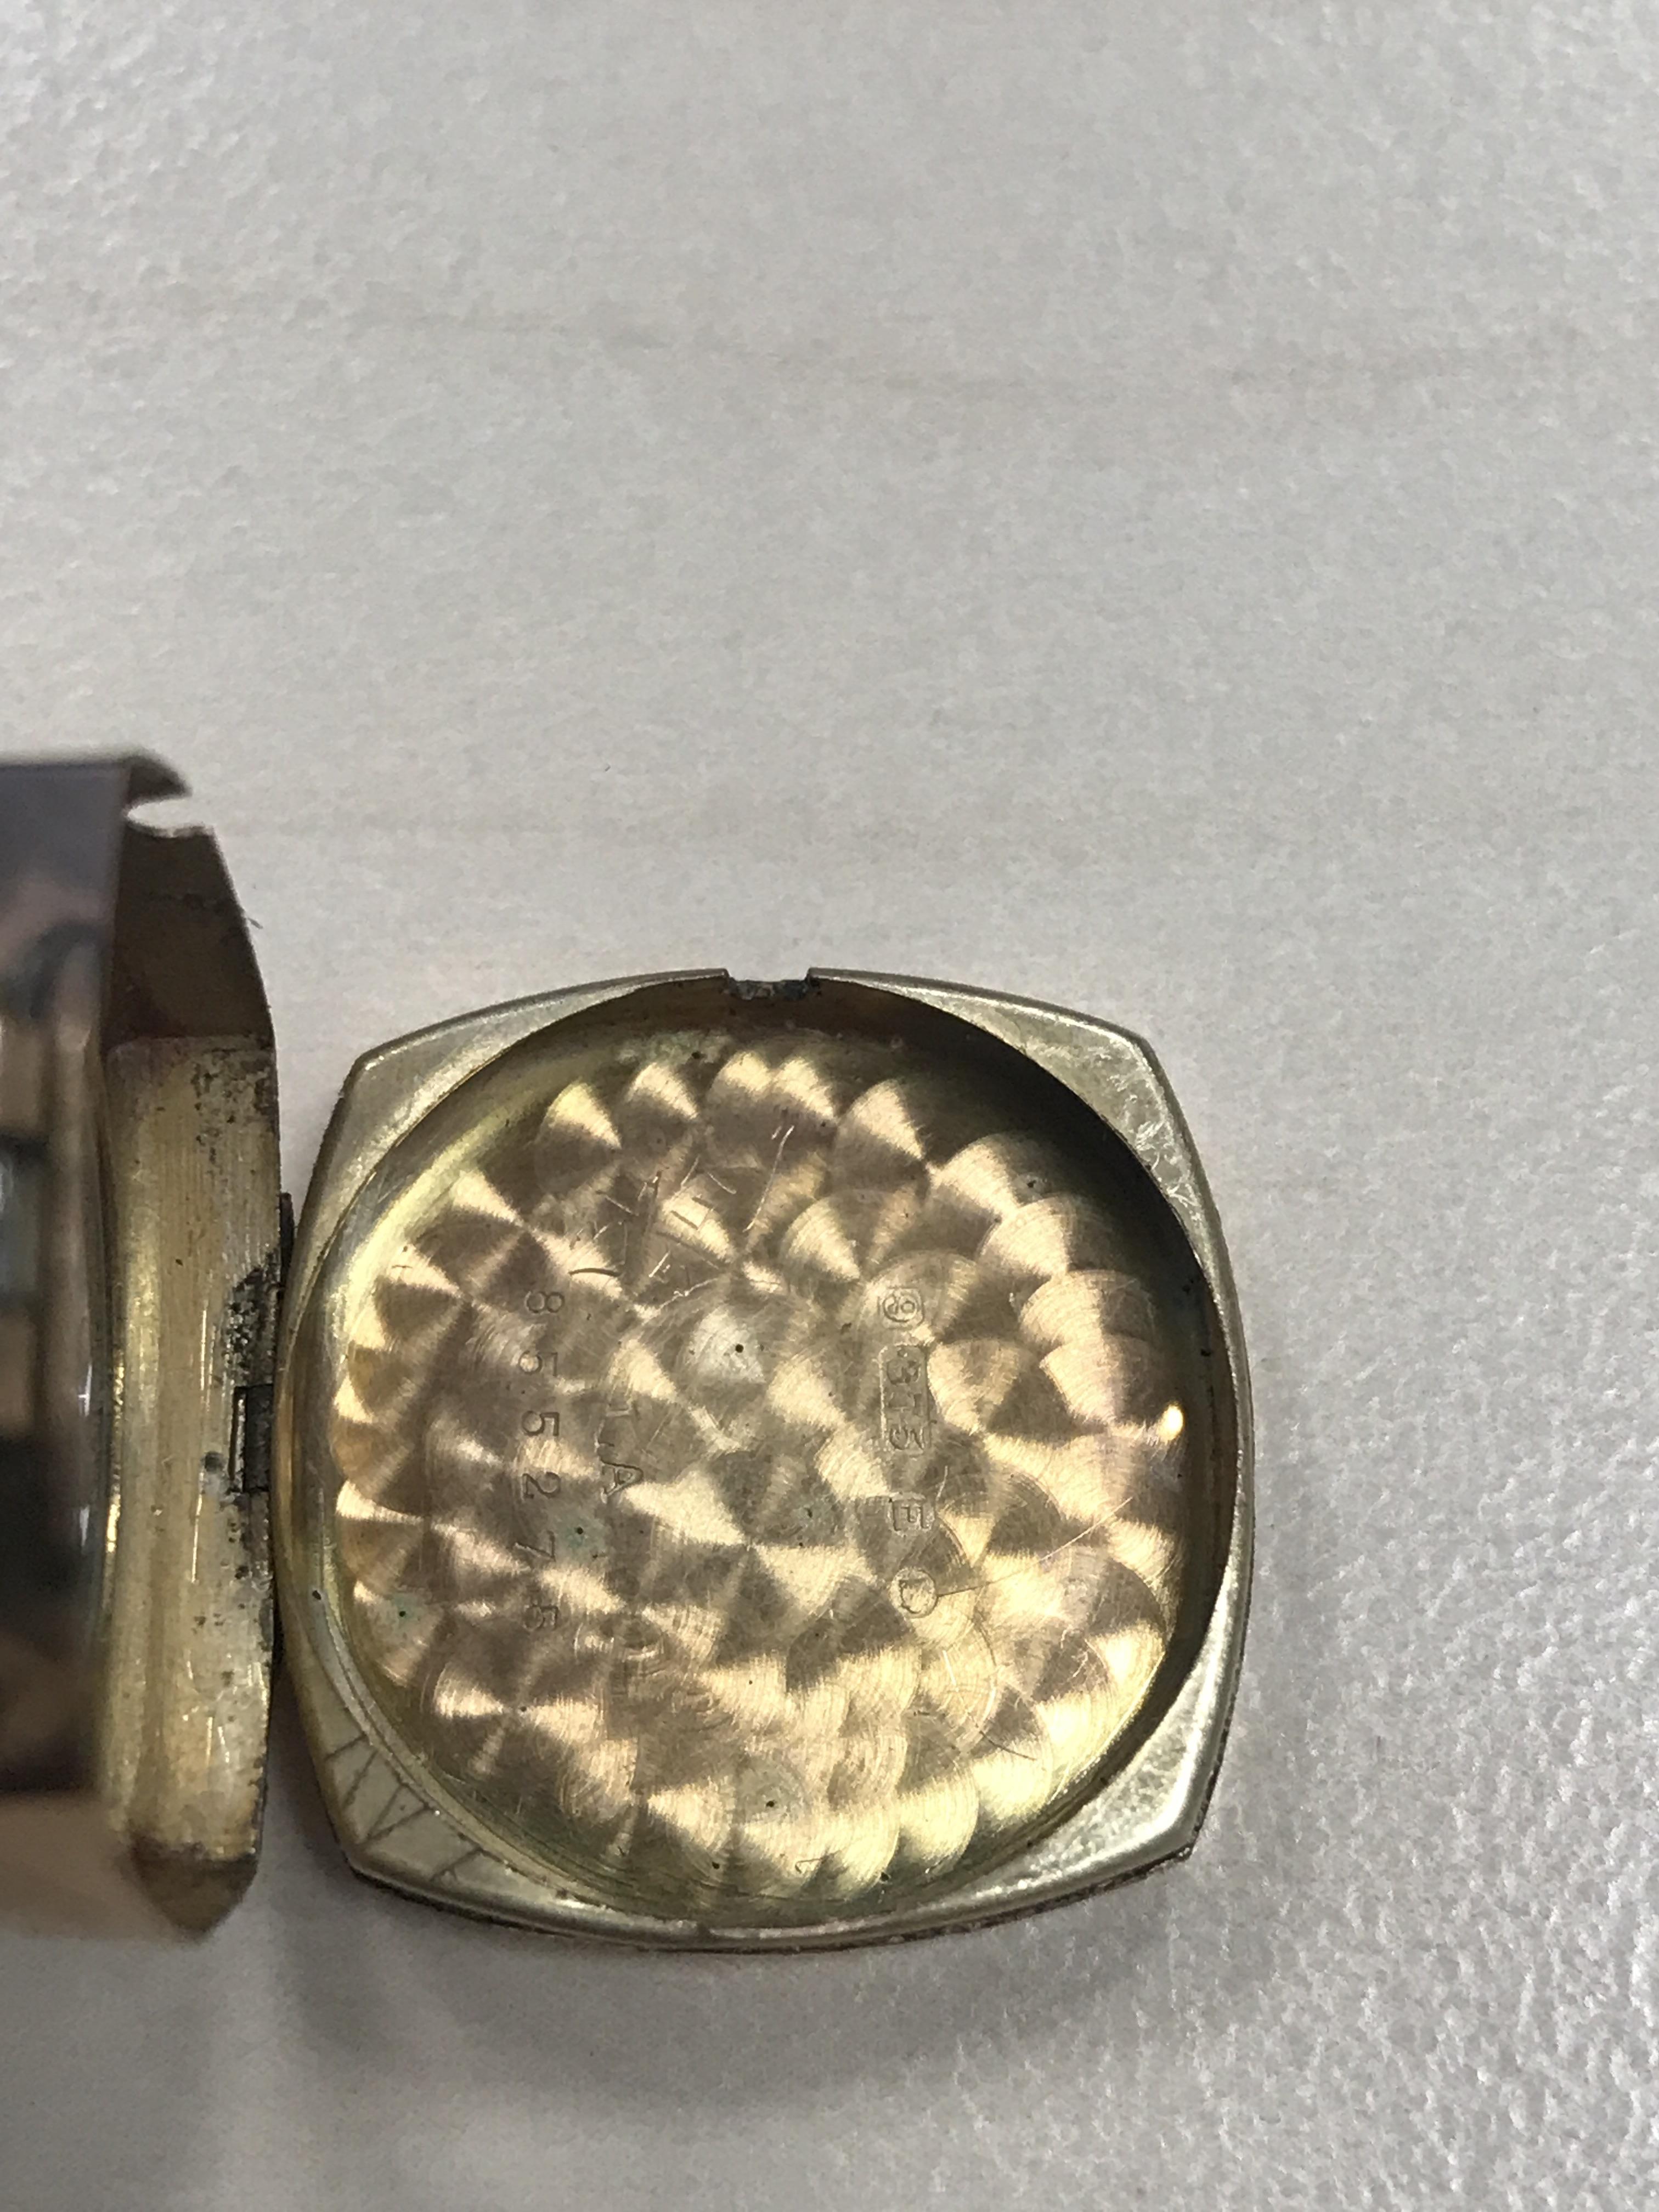 A LADY'S ROLEX GOLD WRIST WATCH - Image 3 of 4